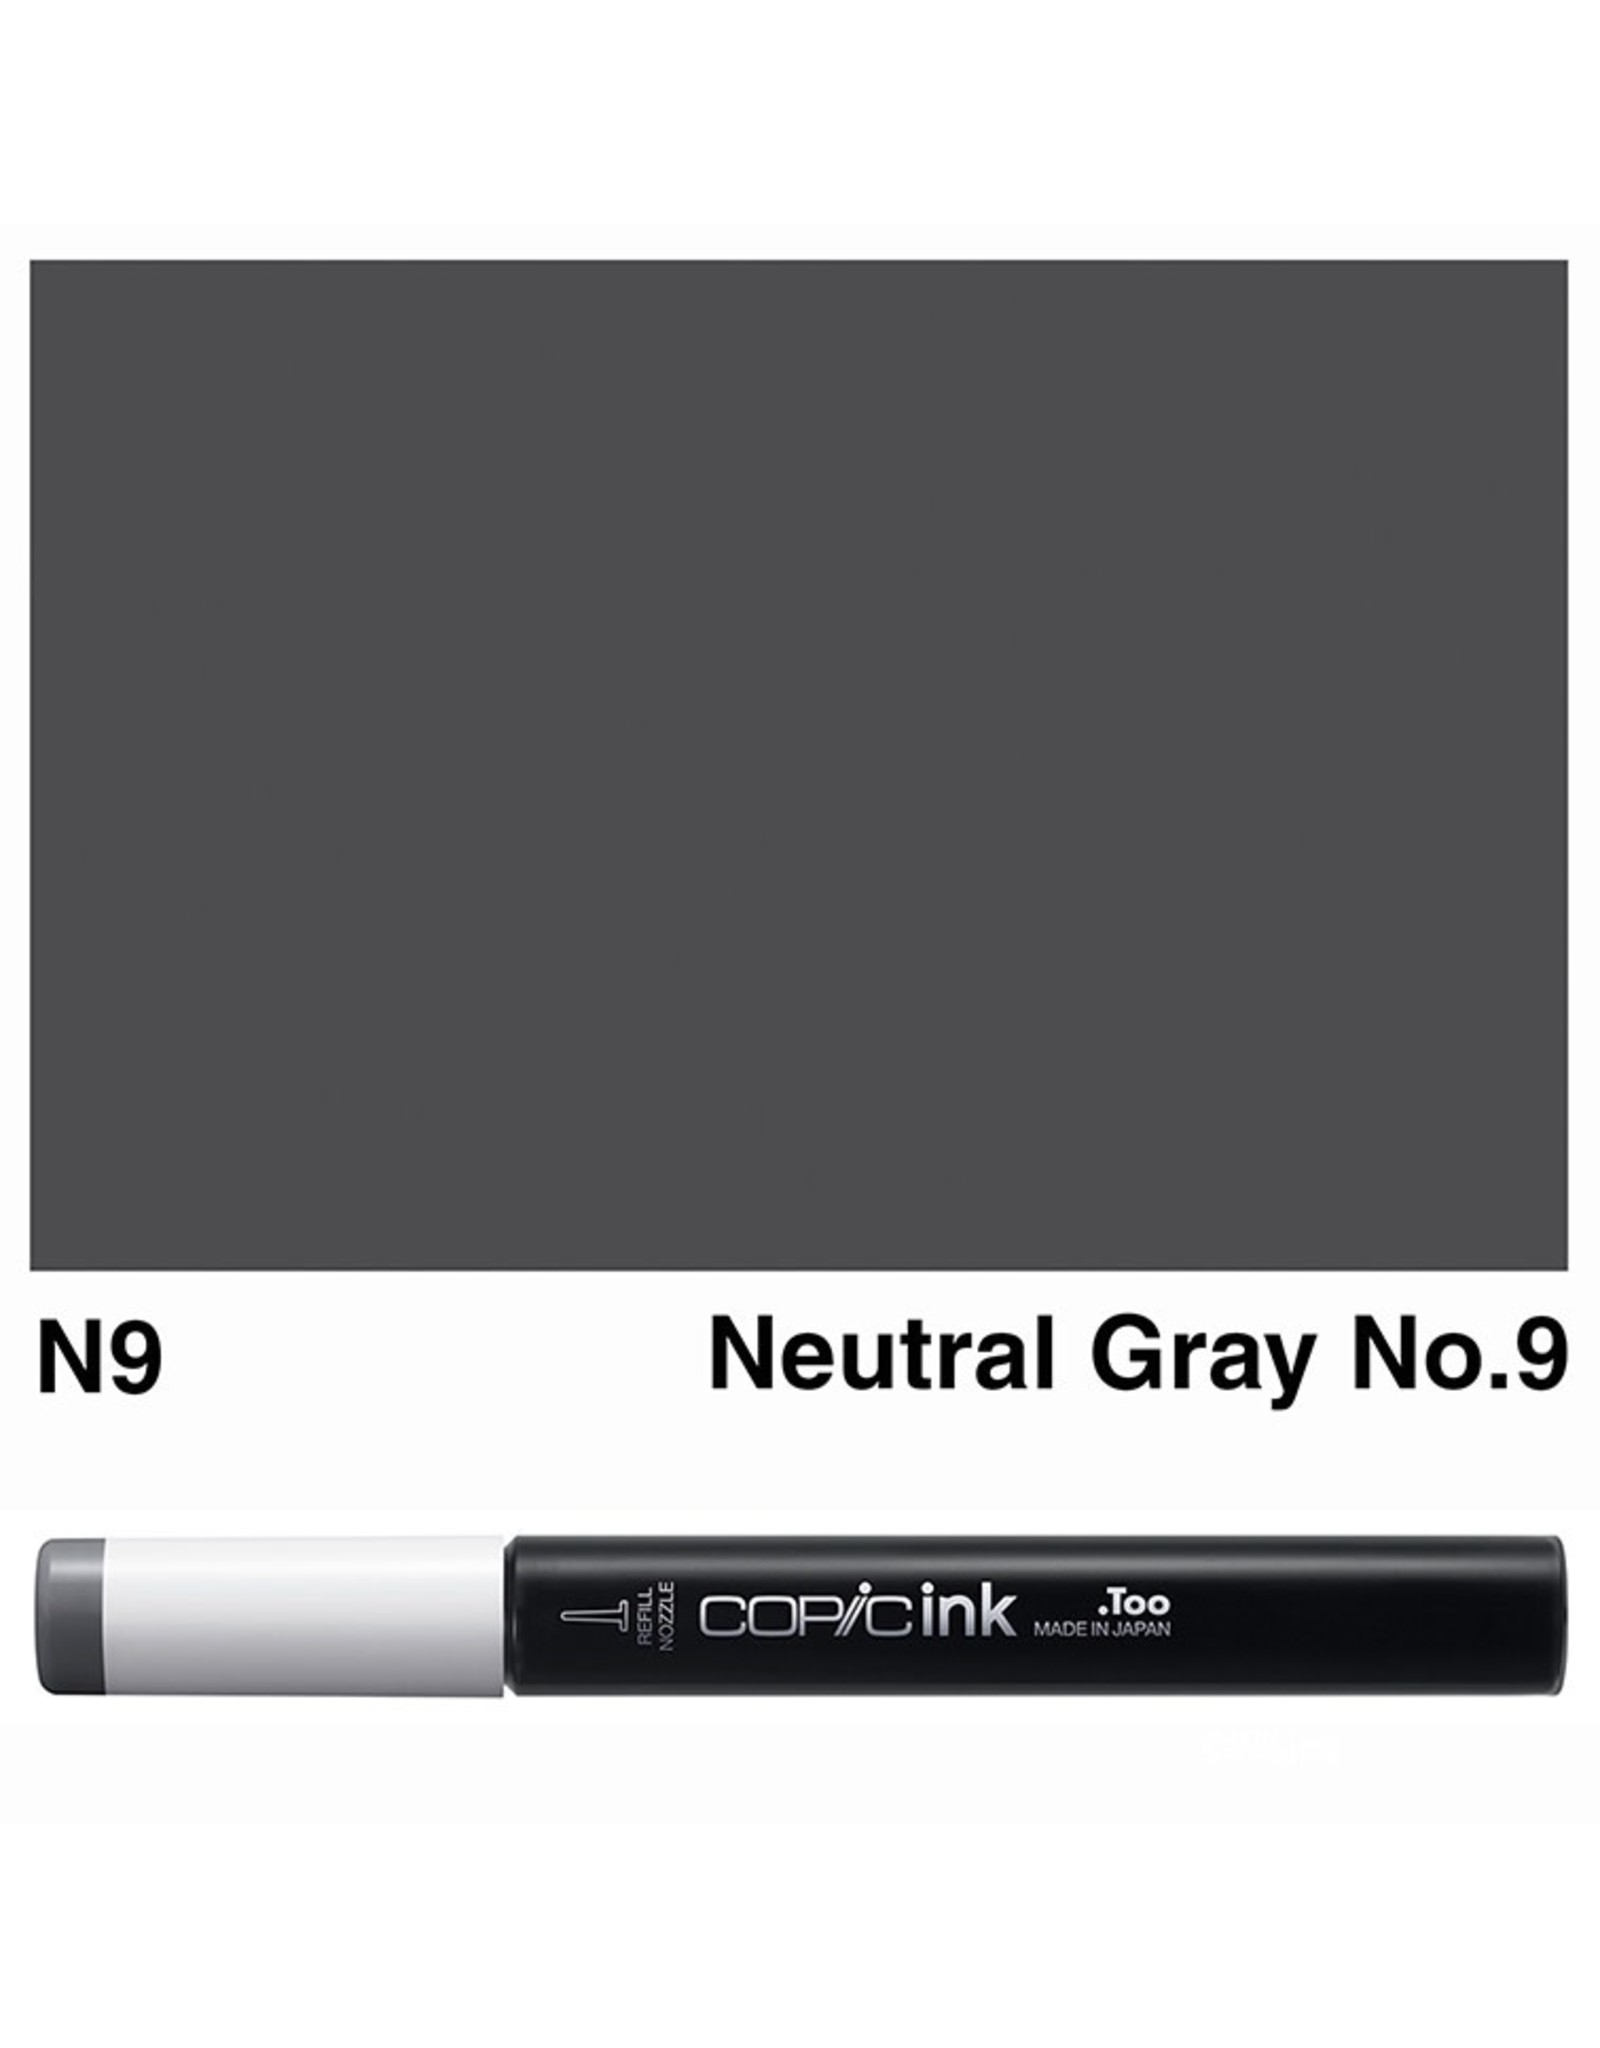 COPIC COPIC N-9 NEUTRAL GRAY #9 REFILL